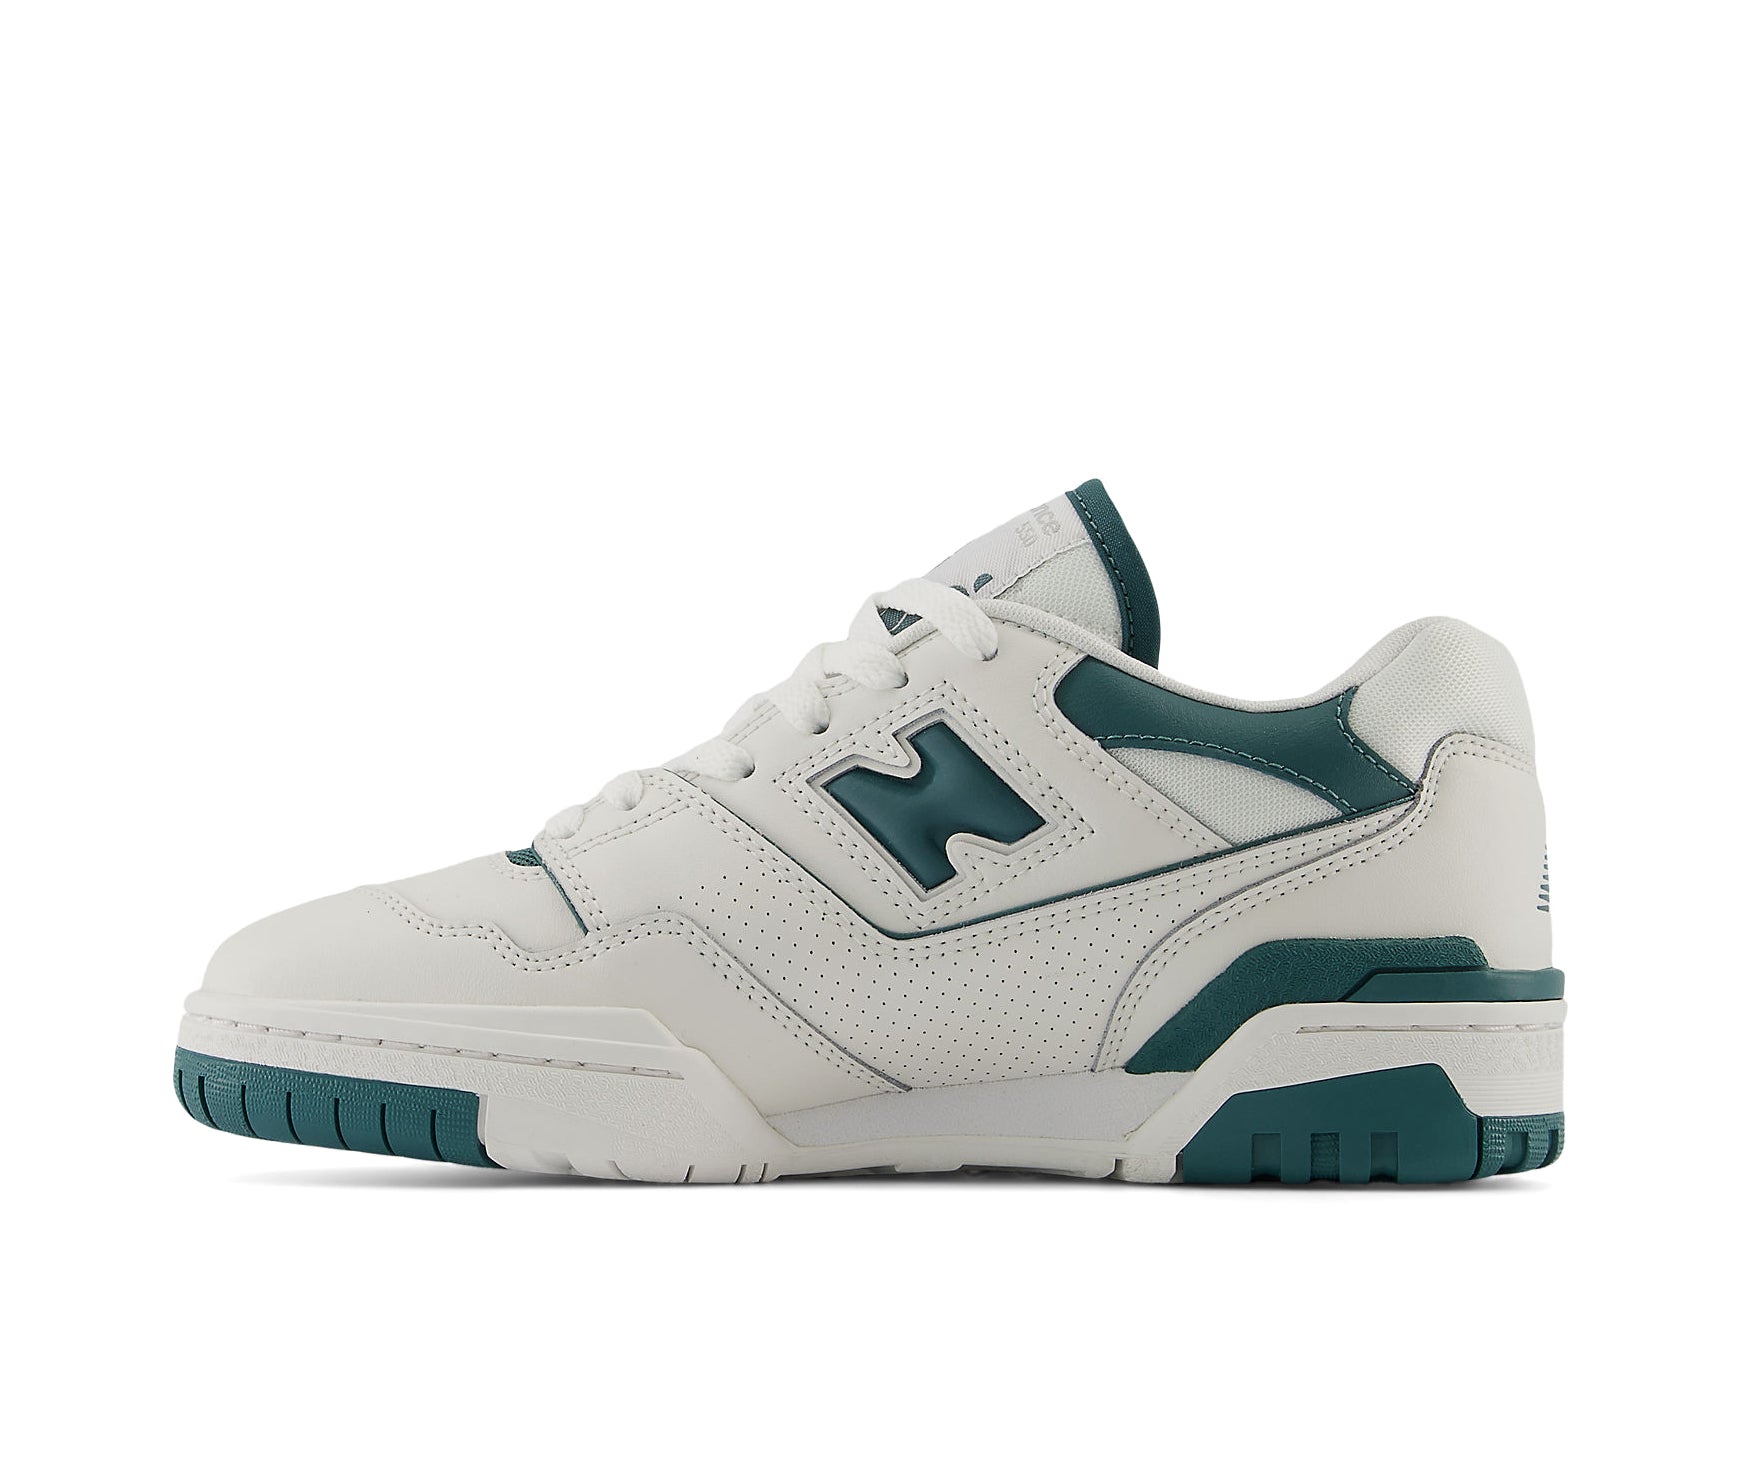 A white and teal leather basketball sneaker from New Balance.